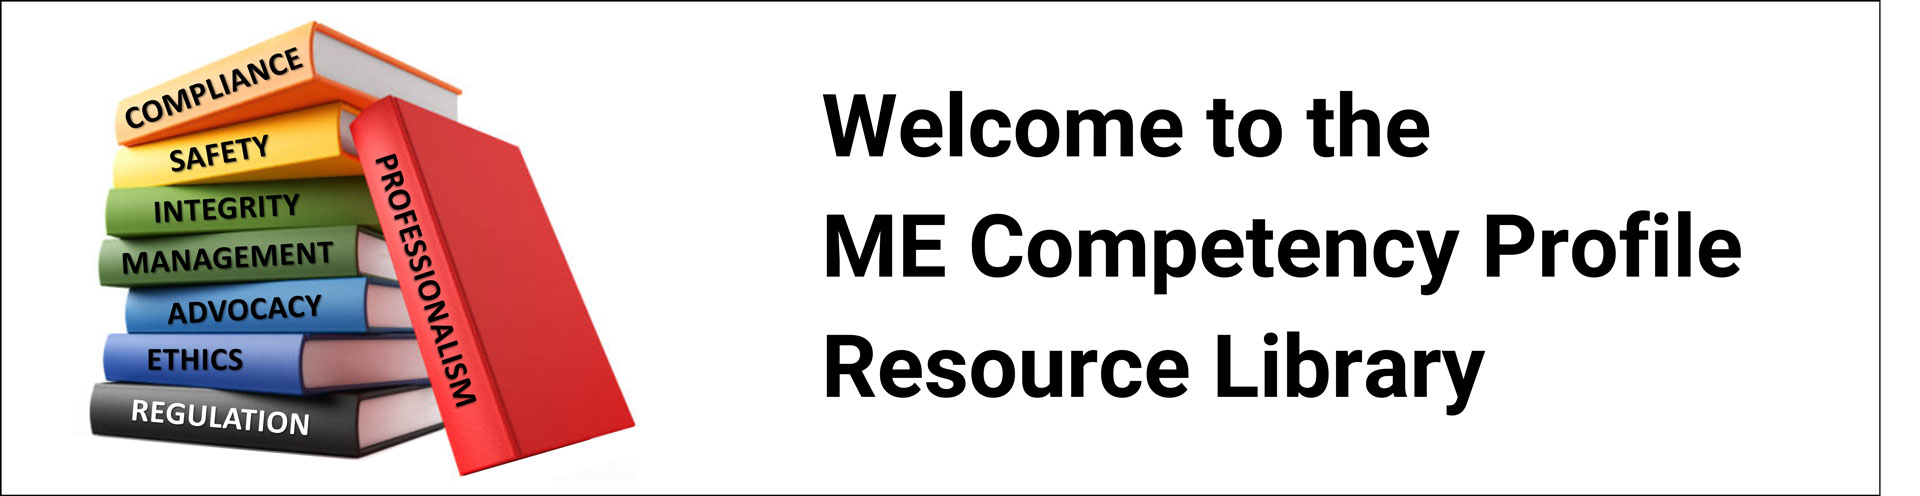 Welcome to the ME Competency Profile Resource Library